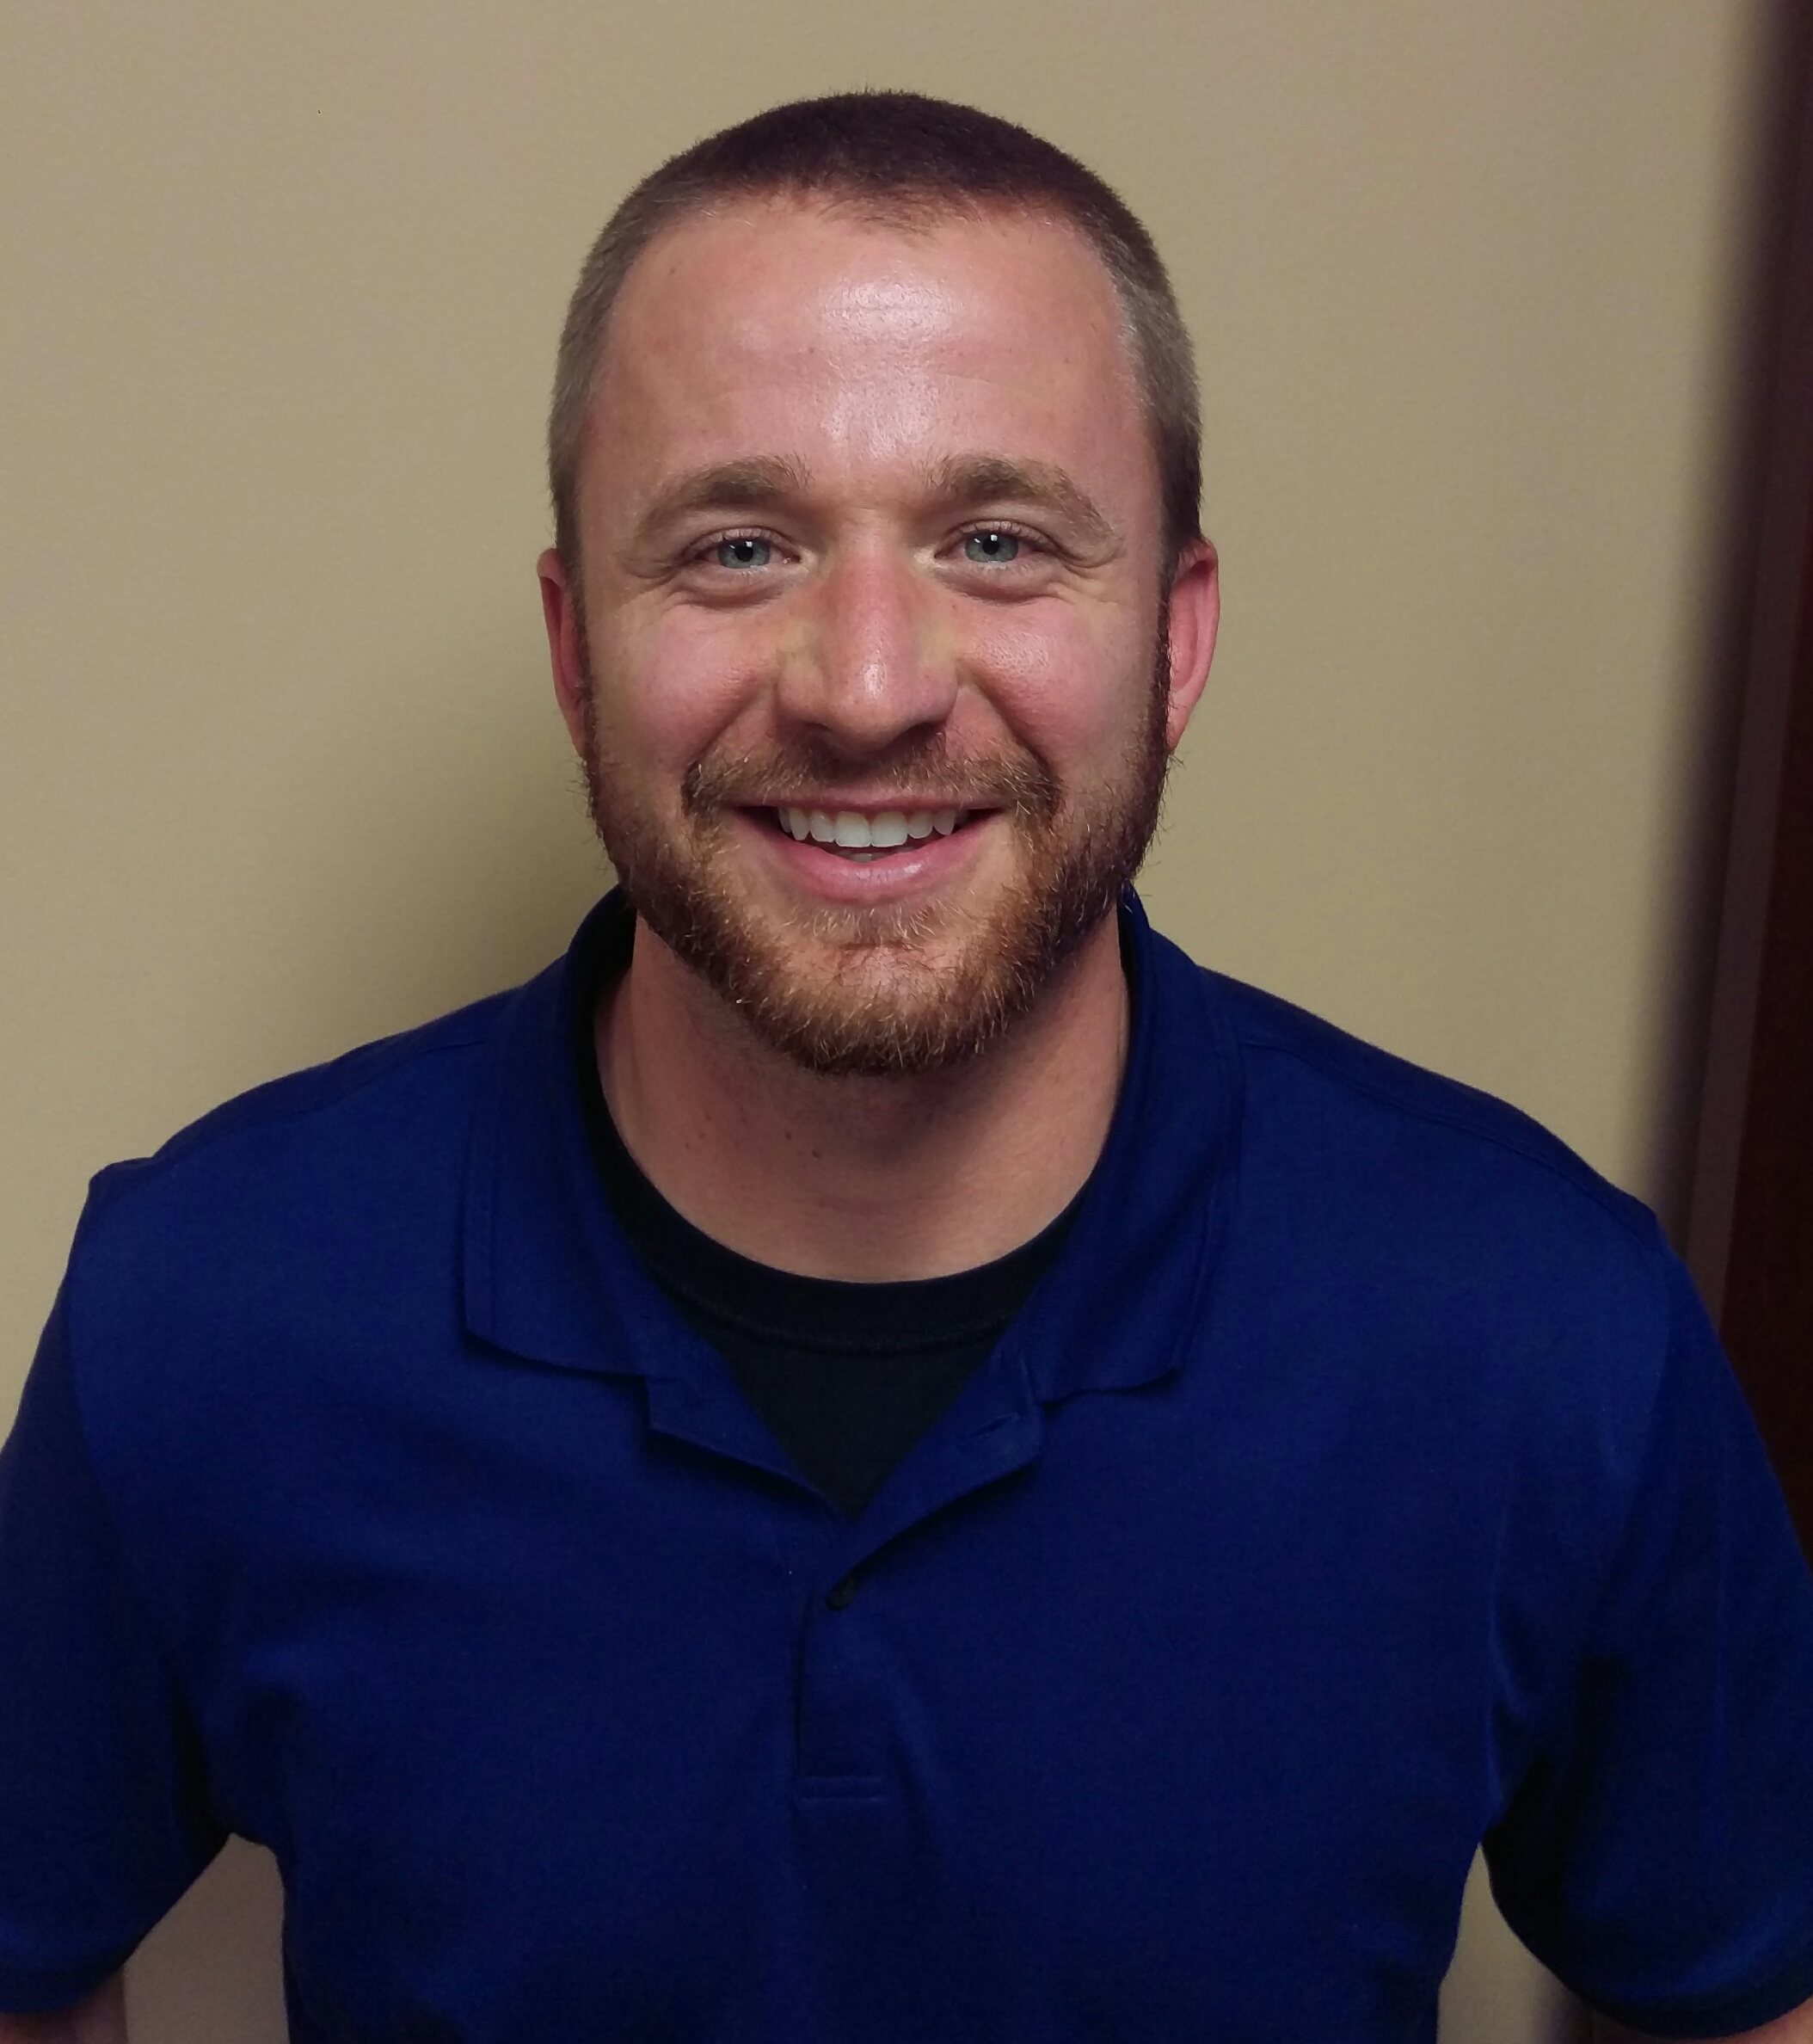 CMG adds new Operations Manager for their Indianapolis Location - Coated Metals Group - Joe-Ley-CMG-Ops-Manager